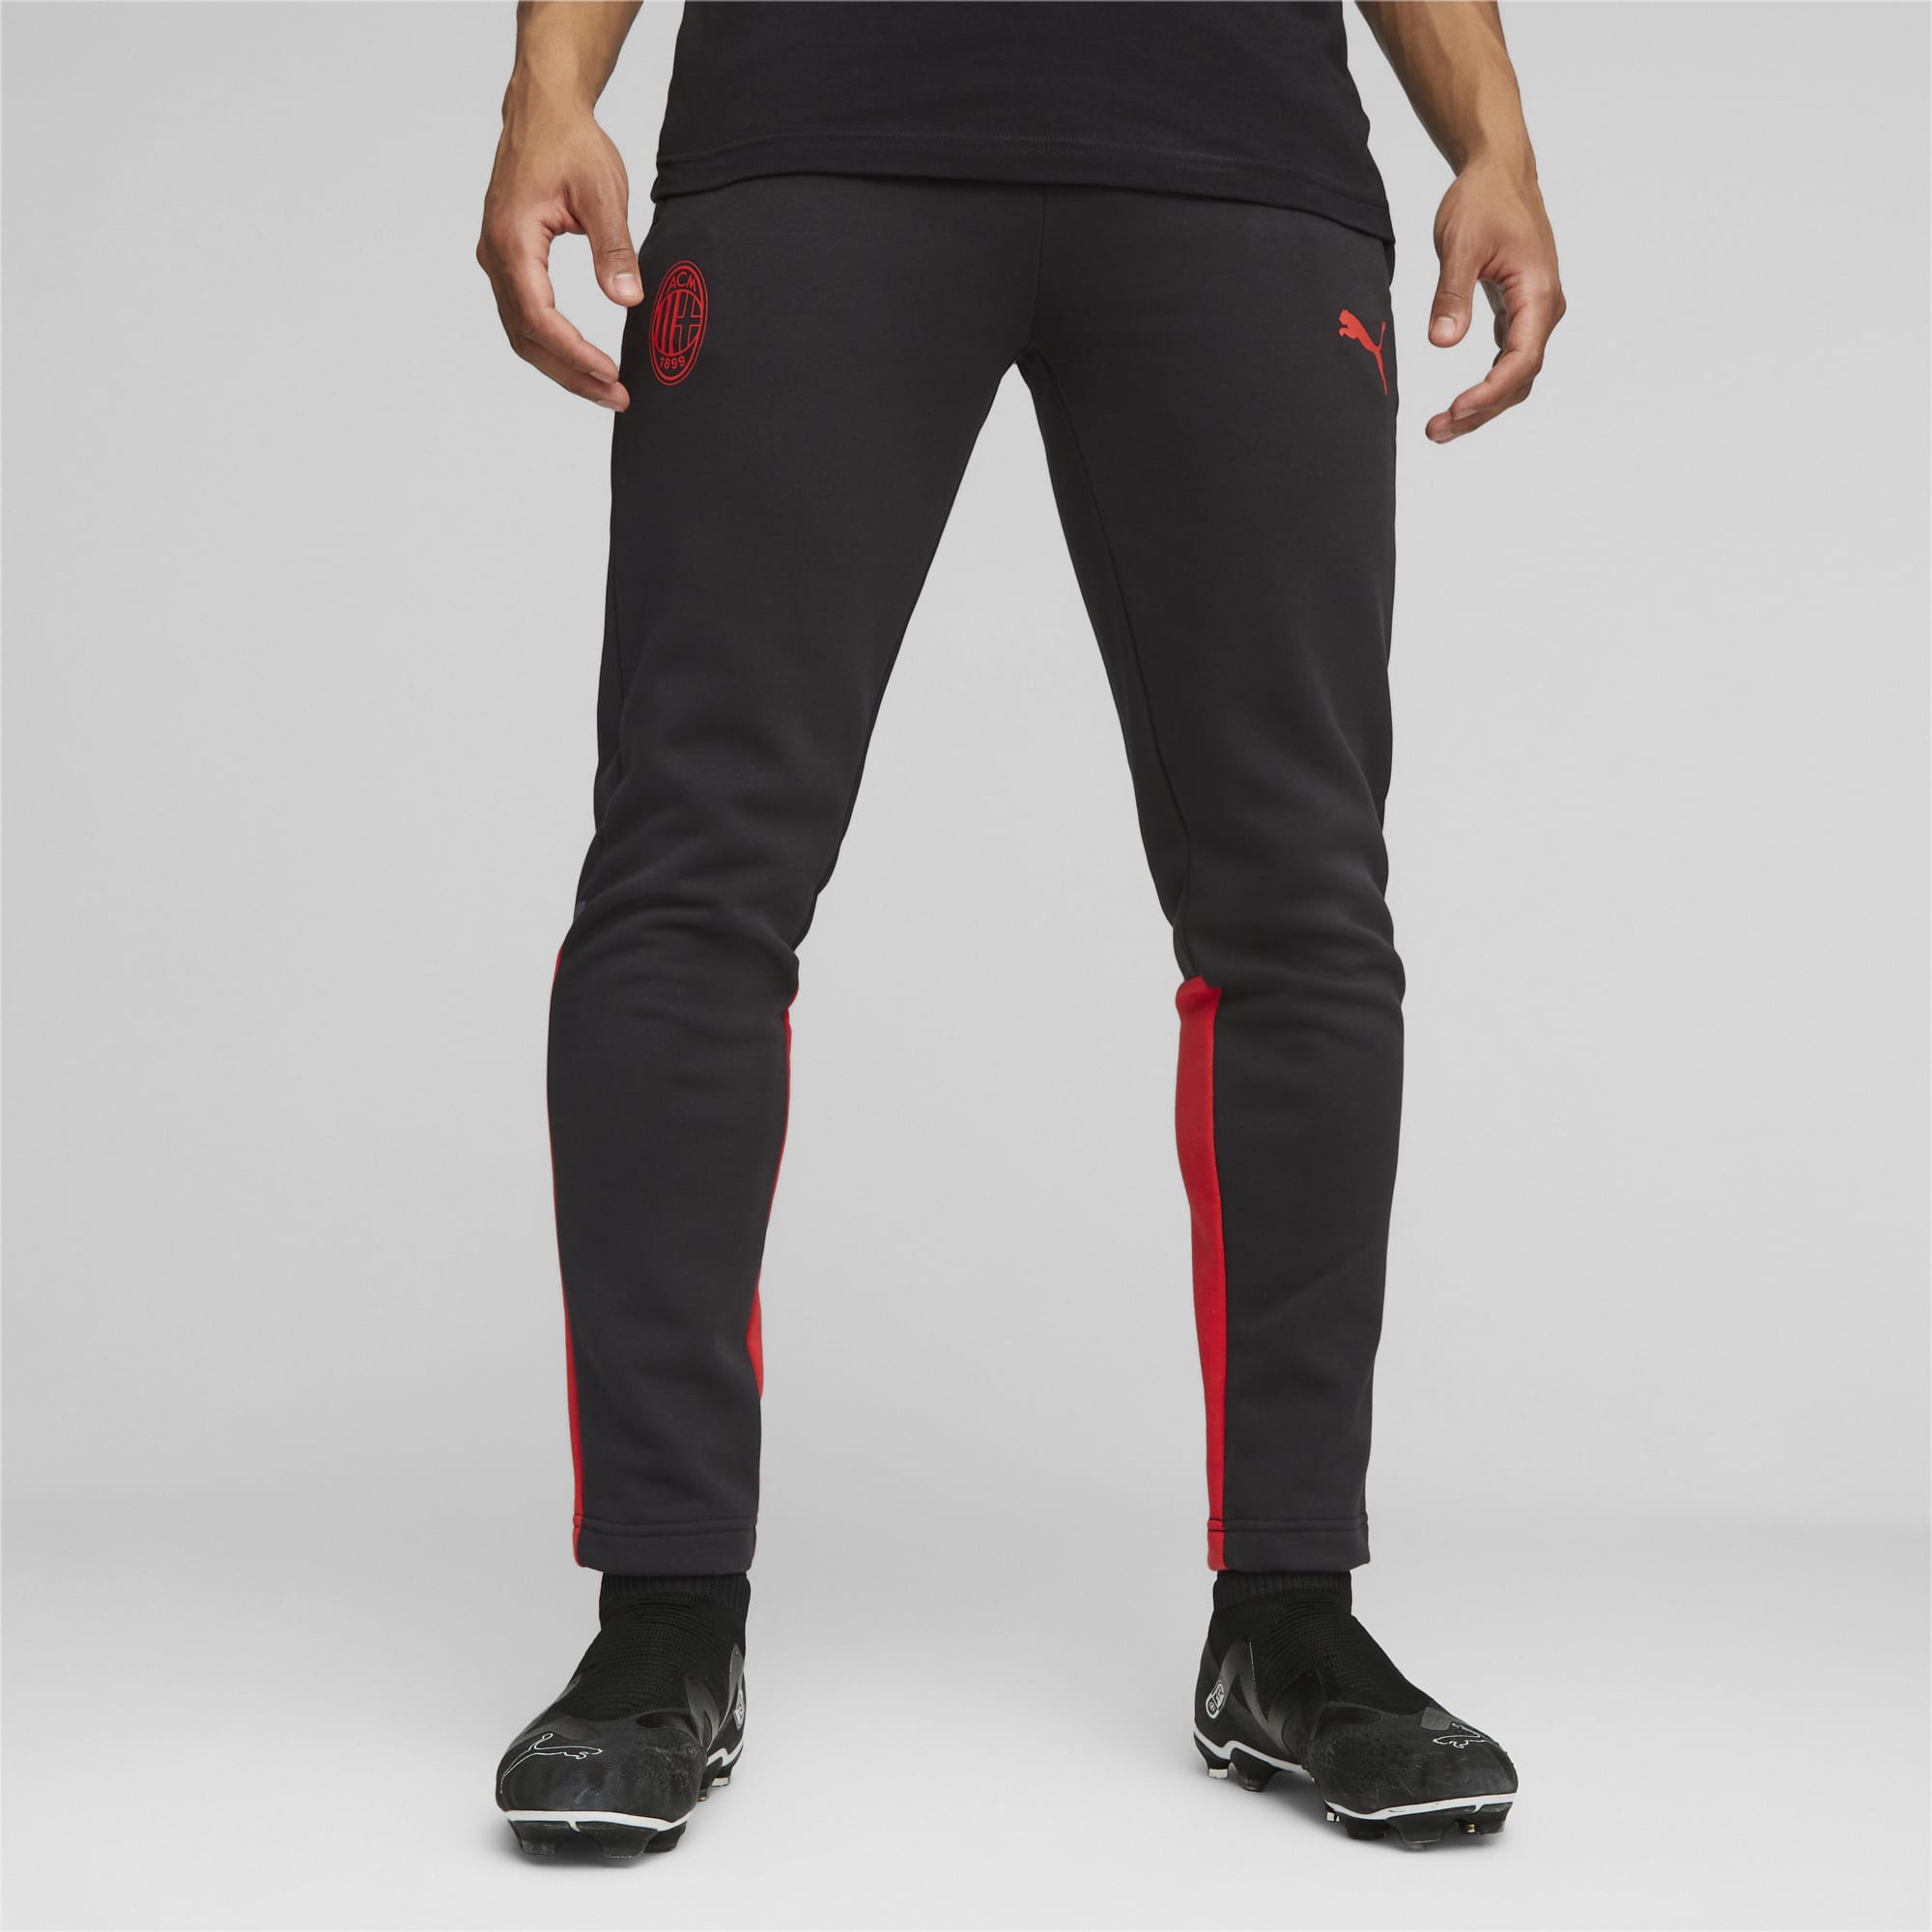 AC Milan Football Casuals Sweatpants, red